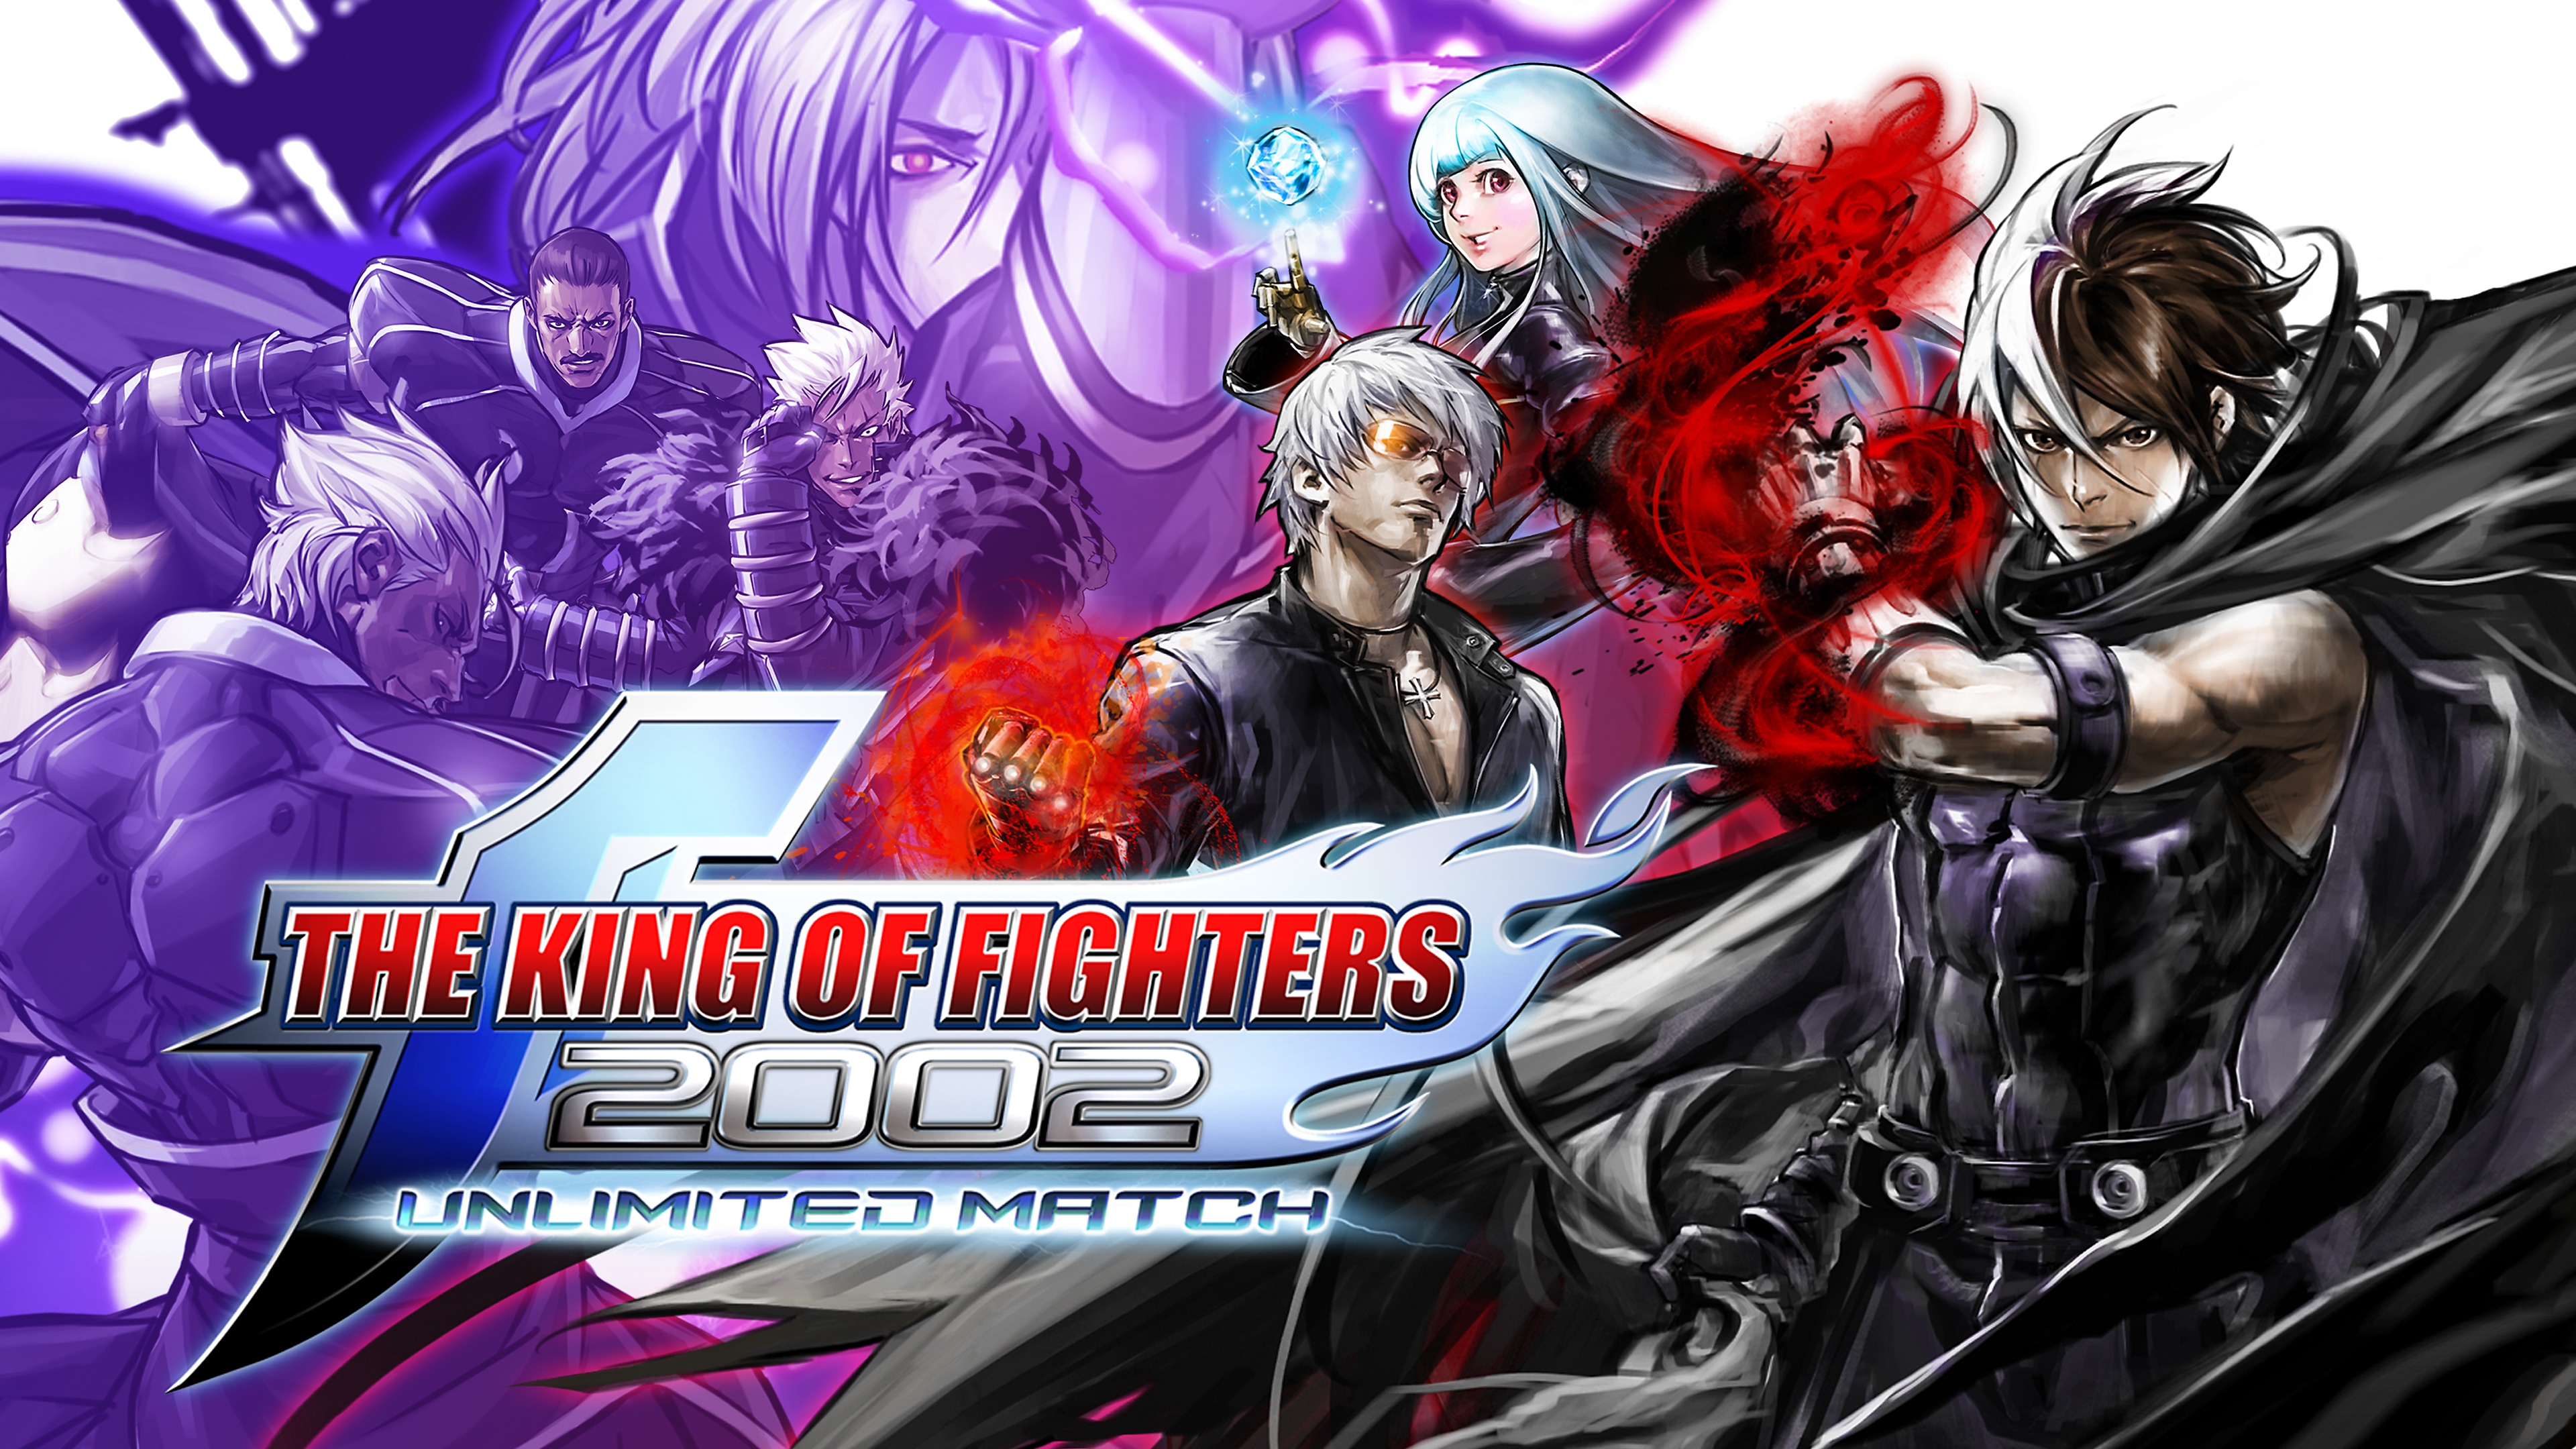 The King of Fighters 2002 – Unlimited Match fő grafika